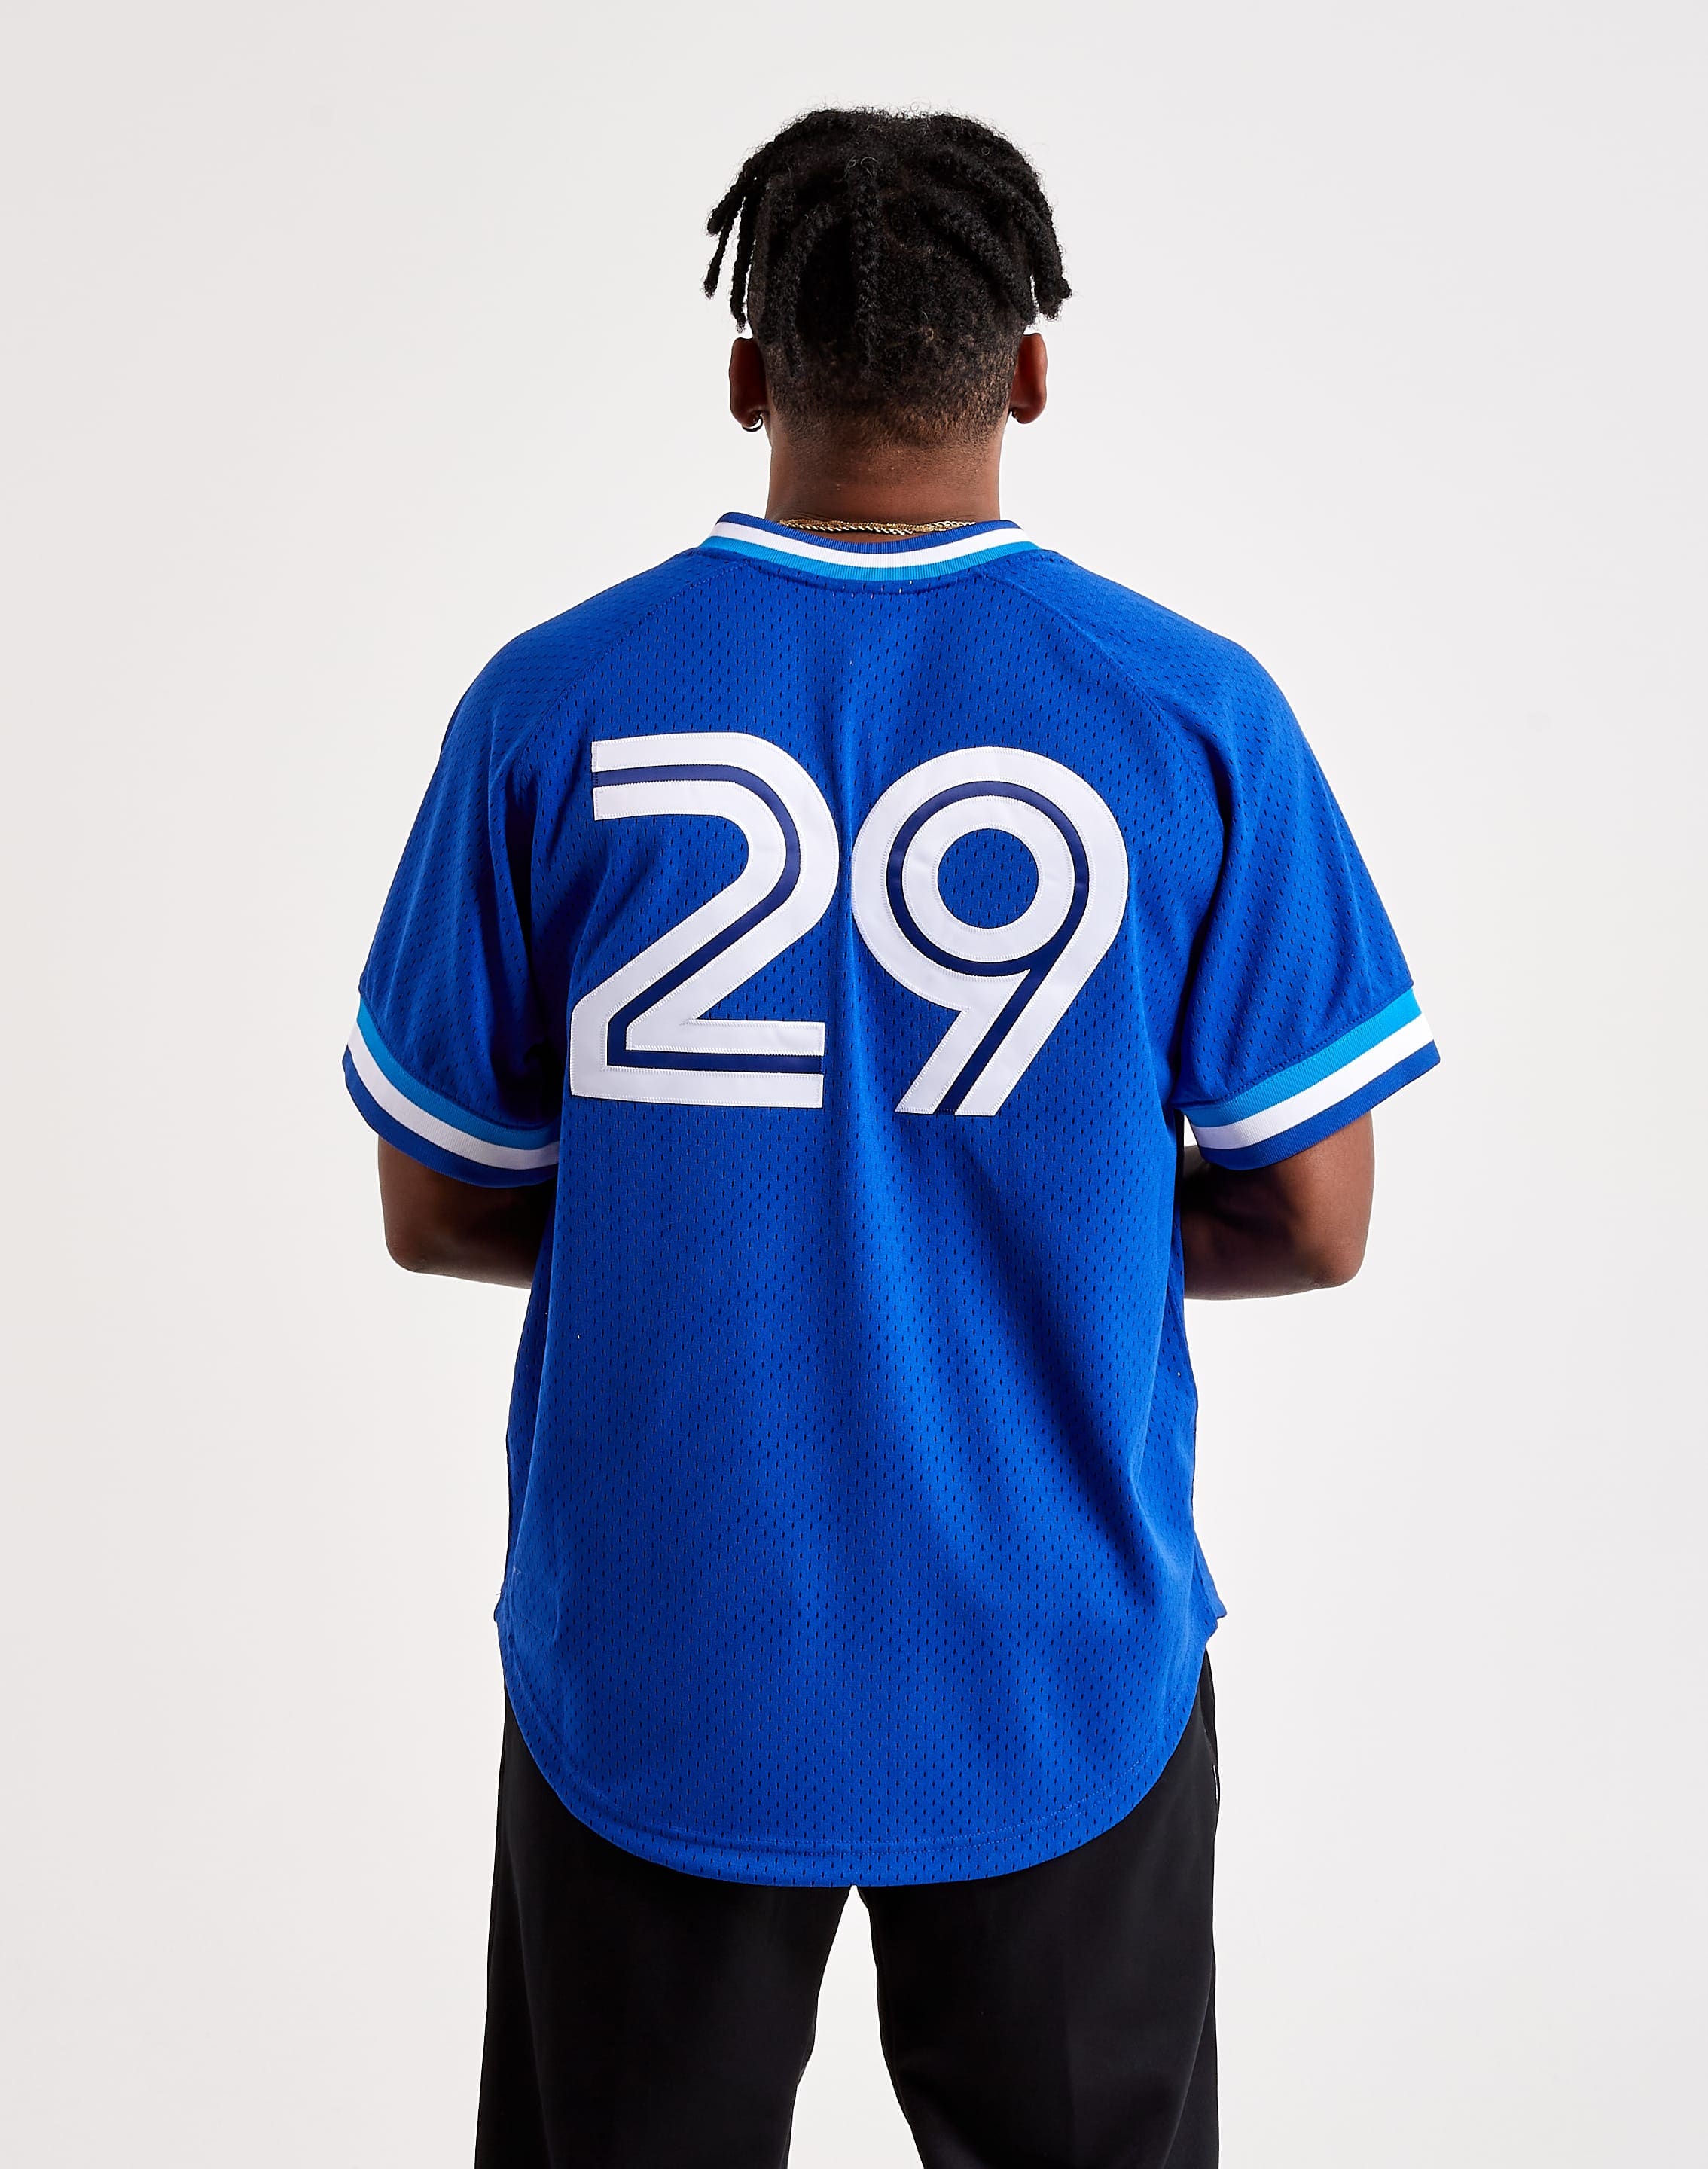 Authentic Joe Carter Toronto Blue Jays 1993 Pullover Jersey - Shop Mitchell  & Ness Authentic Jerseys and Replicas Mitchell & Ness Nostalgia Co.